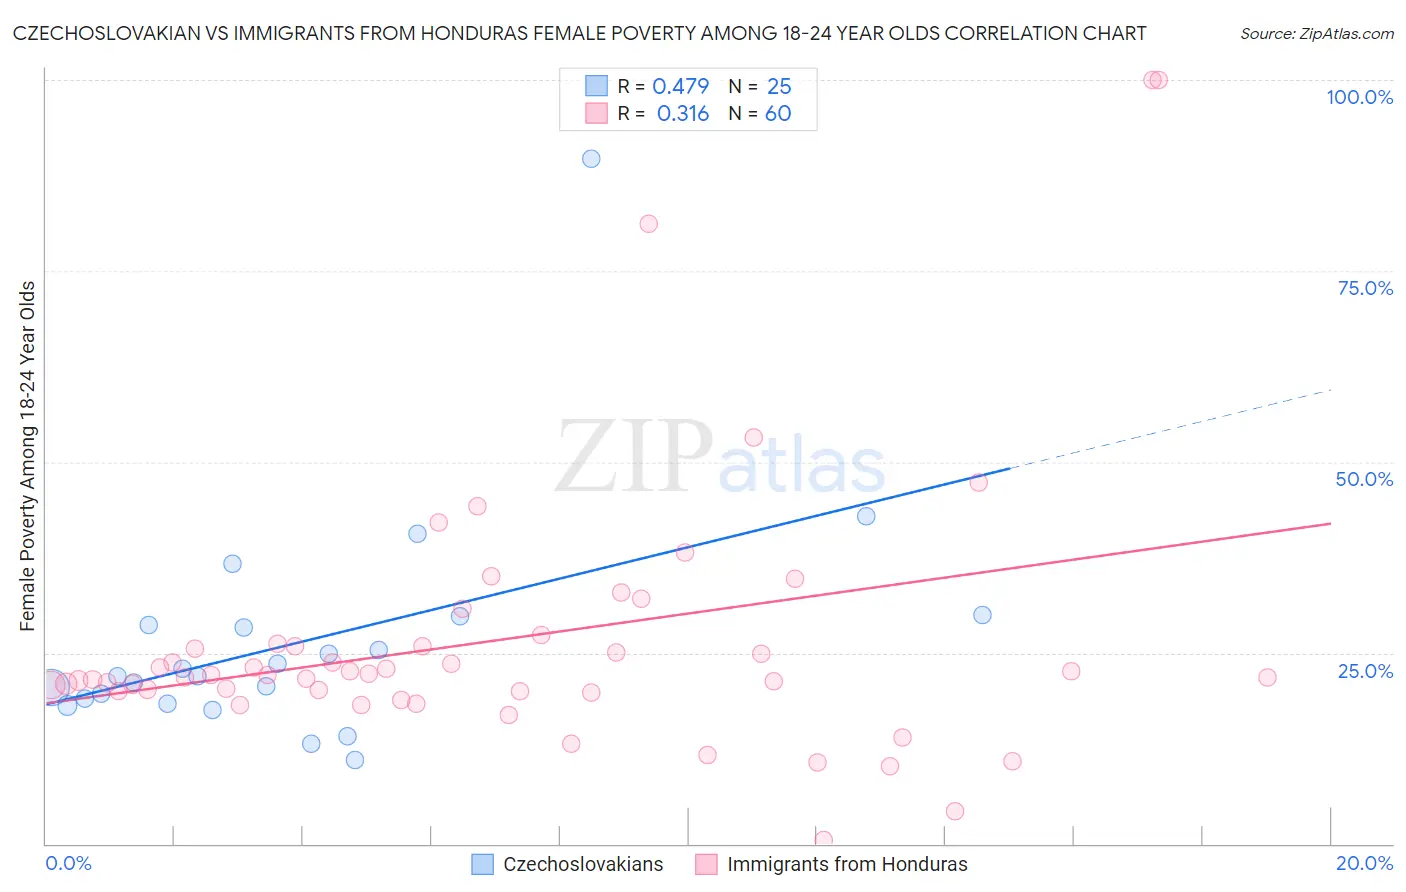 Czechoslovakian vs Immigrants from Honduras Female Poverty Among 18-24 Year Olds